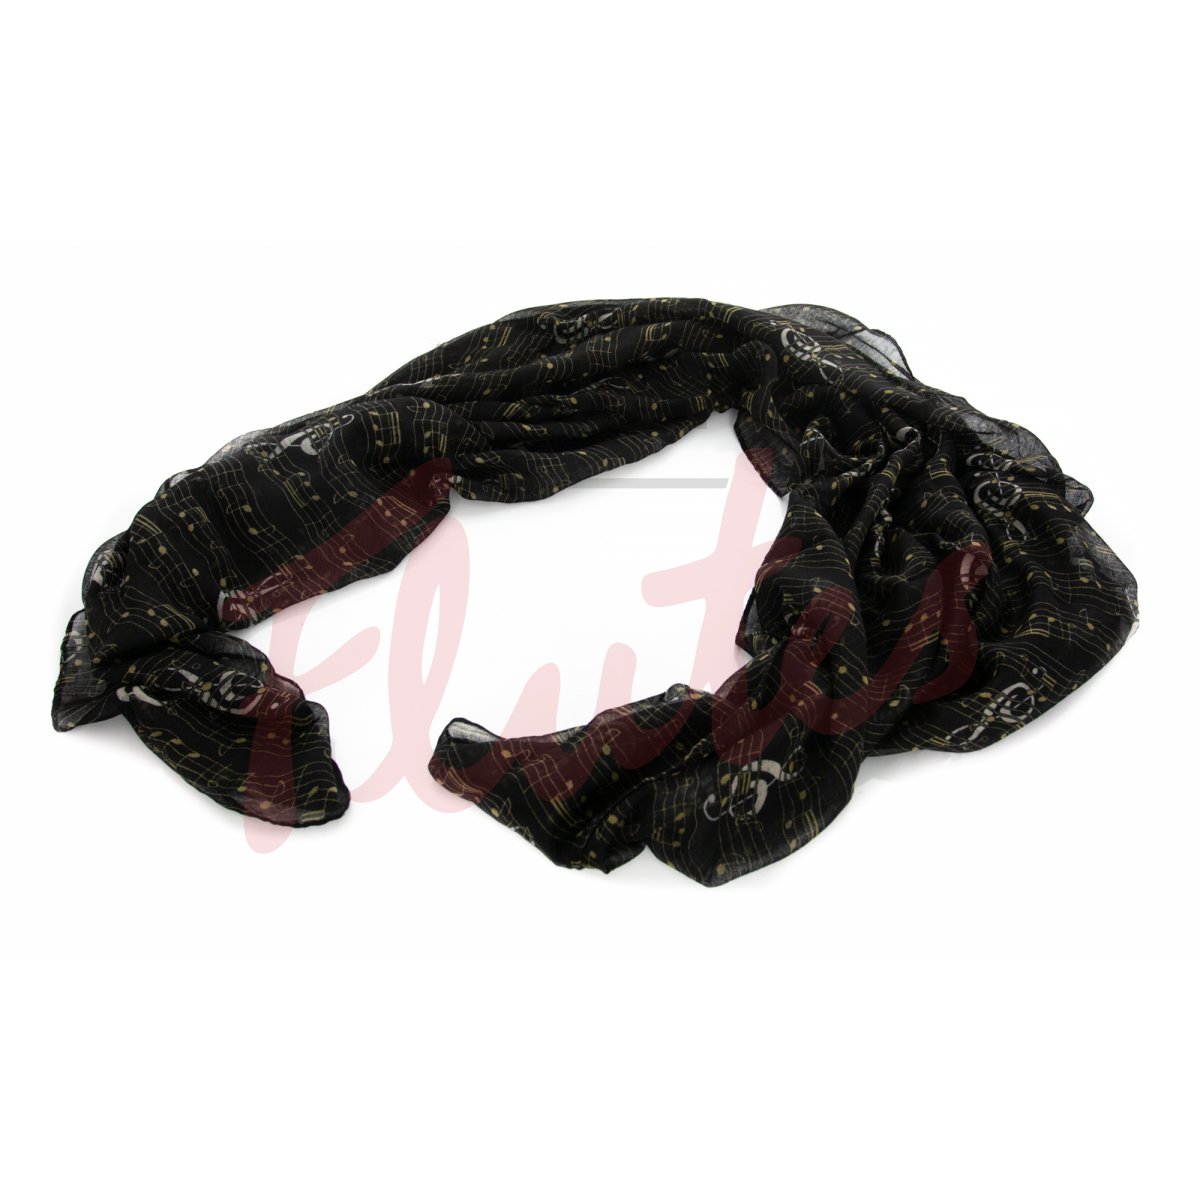 Music Scarf, Black with Yellow Staves